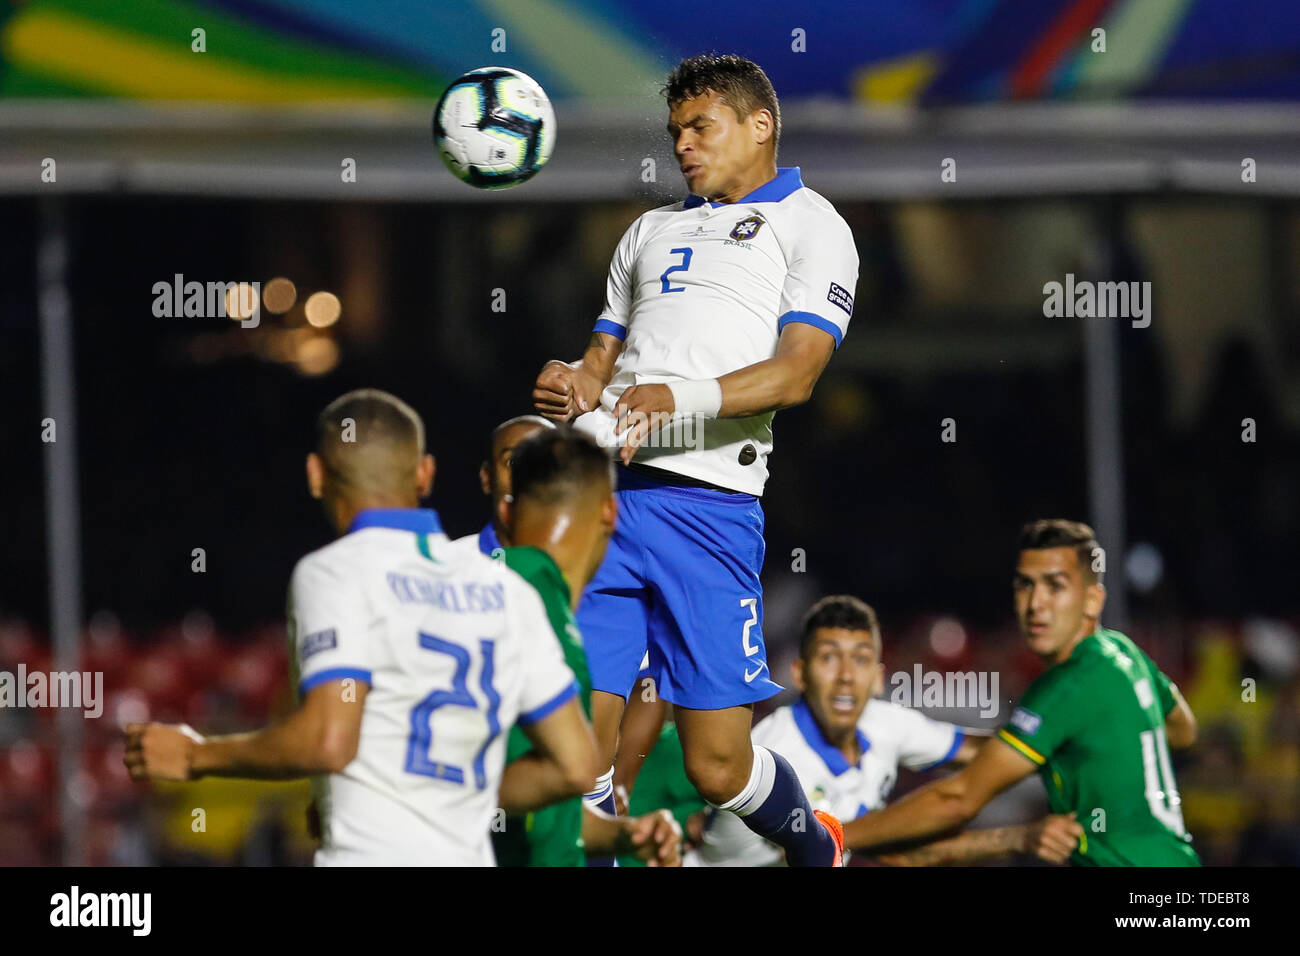 Sao Paulo, Brazil. 14th June, 2019. BRAZIL VS. BOLIVIA - Thiago Silva  during a match between Brazil and Bolivia, valid for the 2019 Copa America  group stage, held this Friday (14) at